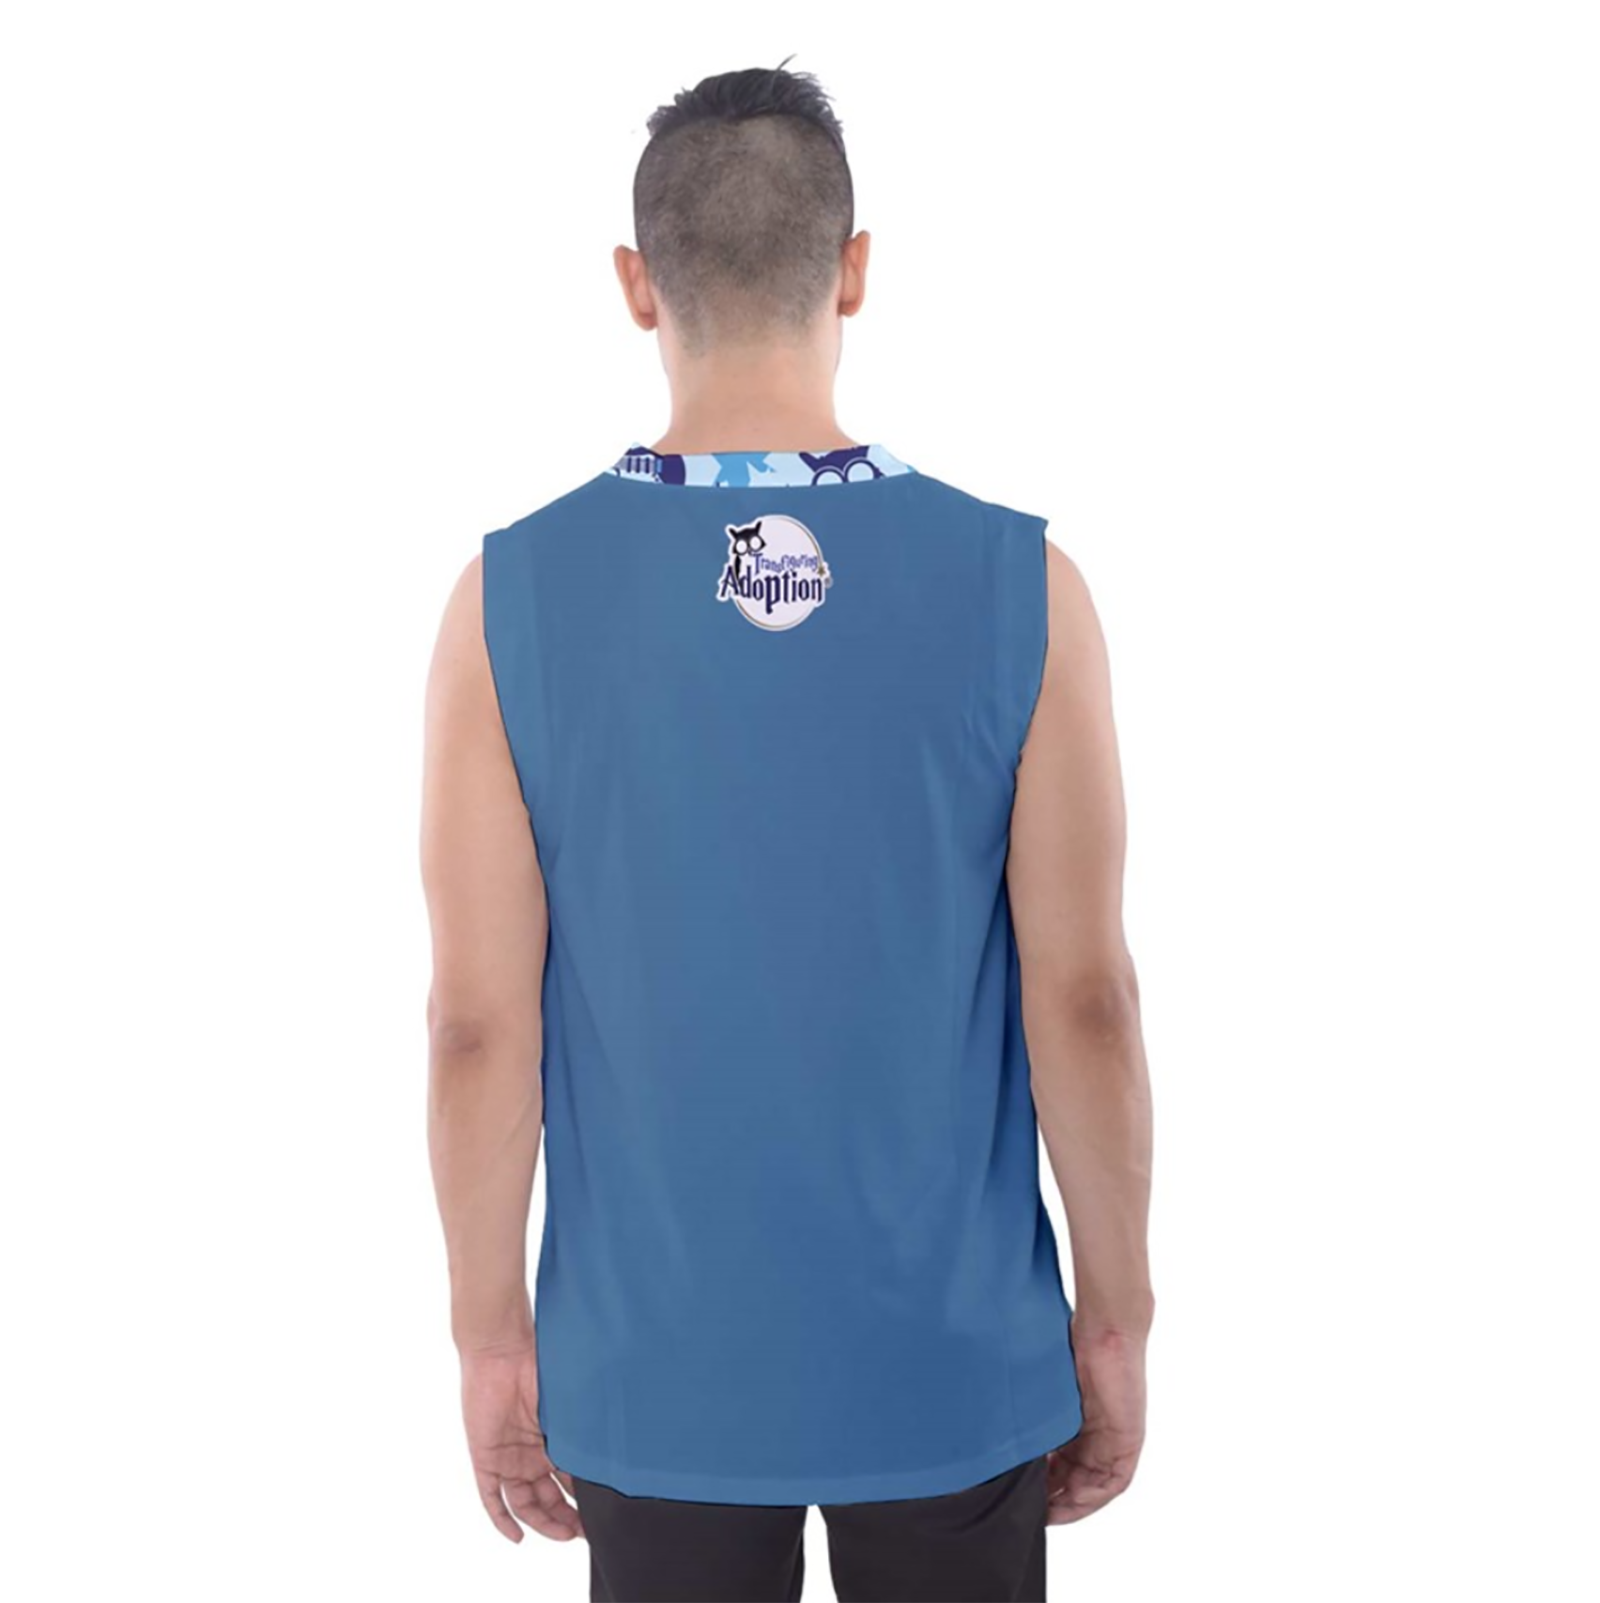 Self-Care Men's Tank Top (Blue Solid Background)